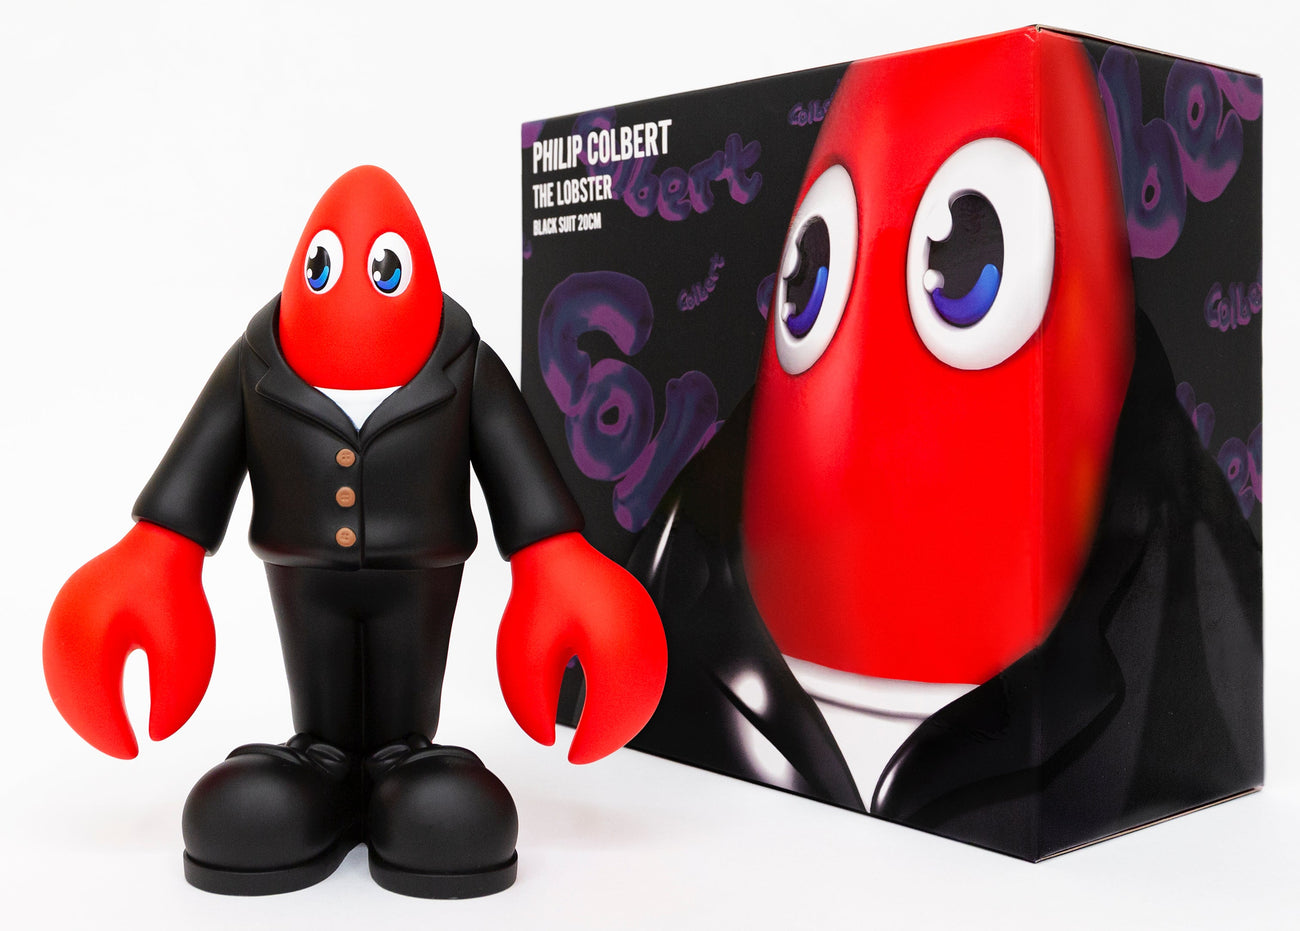 Black Suit Lobster Matte (Goods), Whitestone Gallery, 2021Soft vinyl20.0 × 18.0 × 9.0 cm*You must be a registered member to make a purchase. *Limit one item per order. Estimated shipping time: Within 1 week of order.